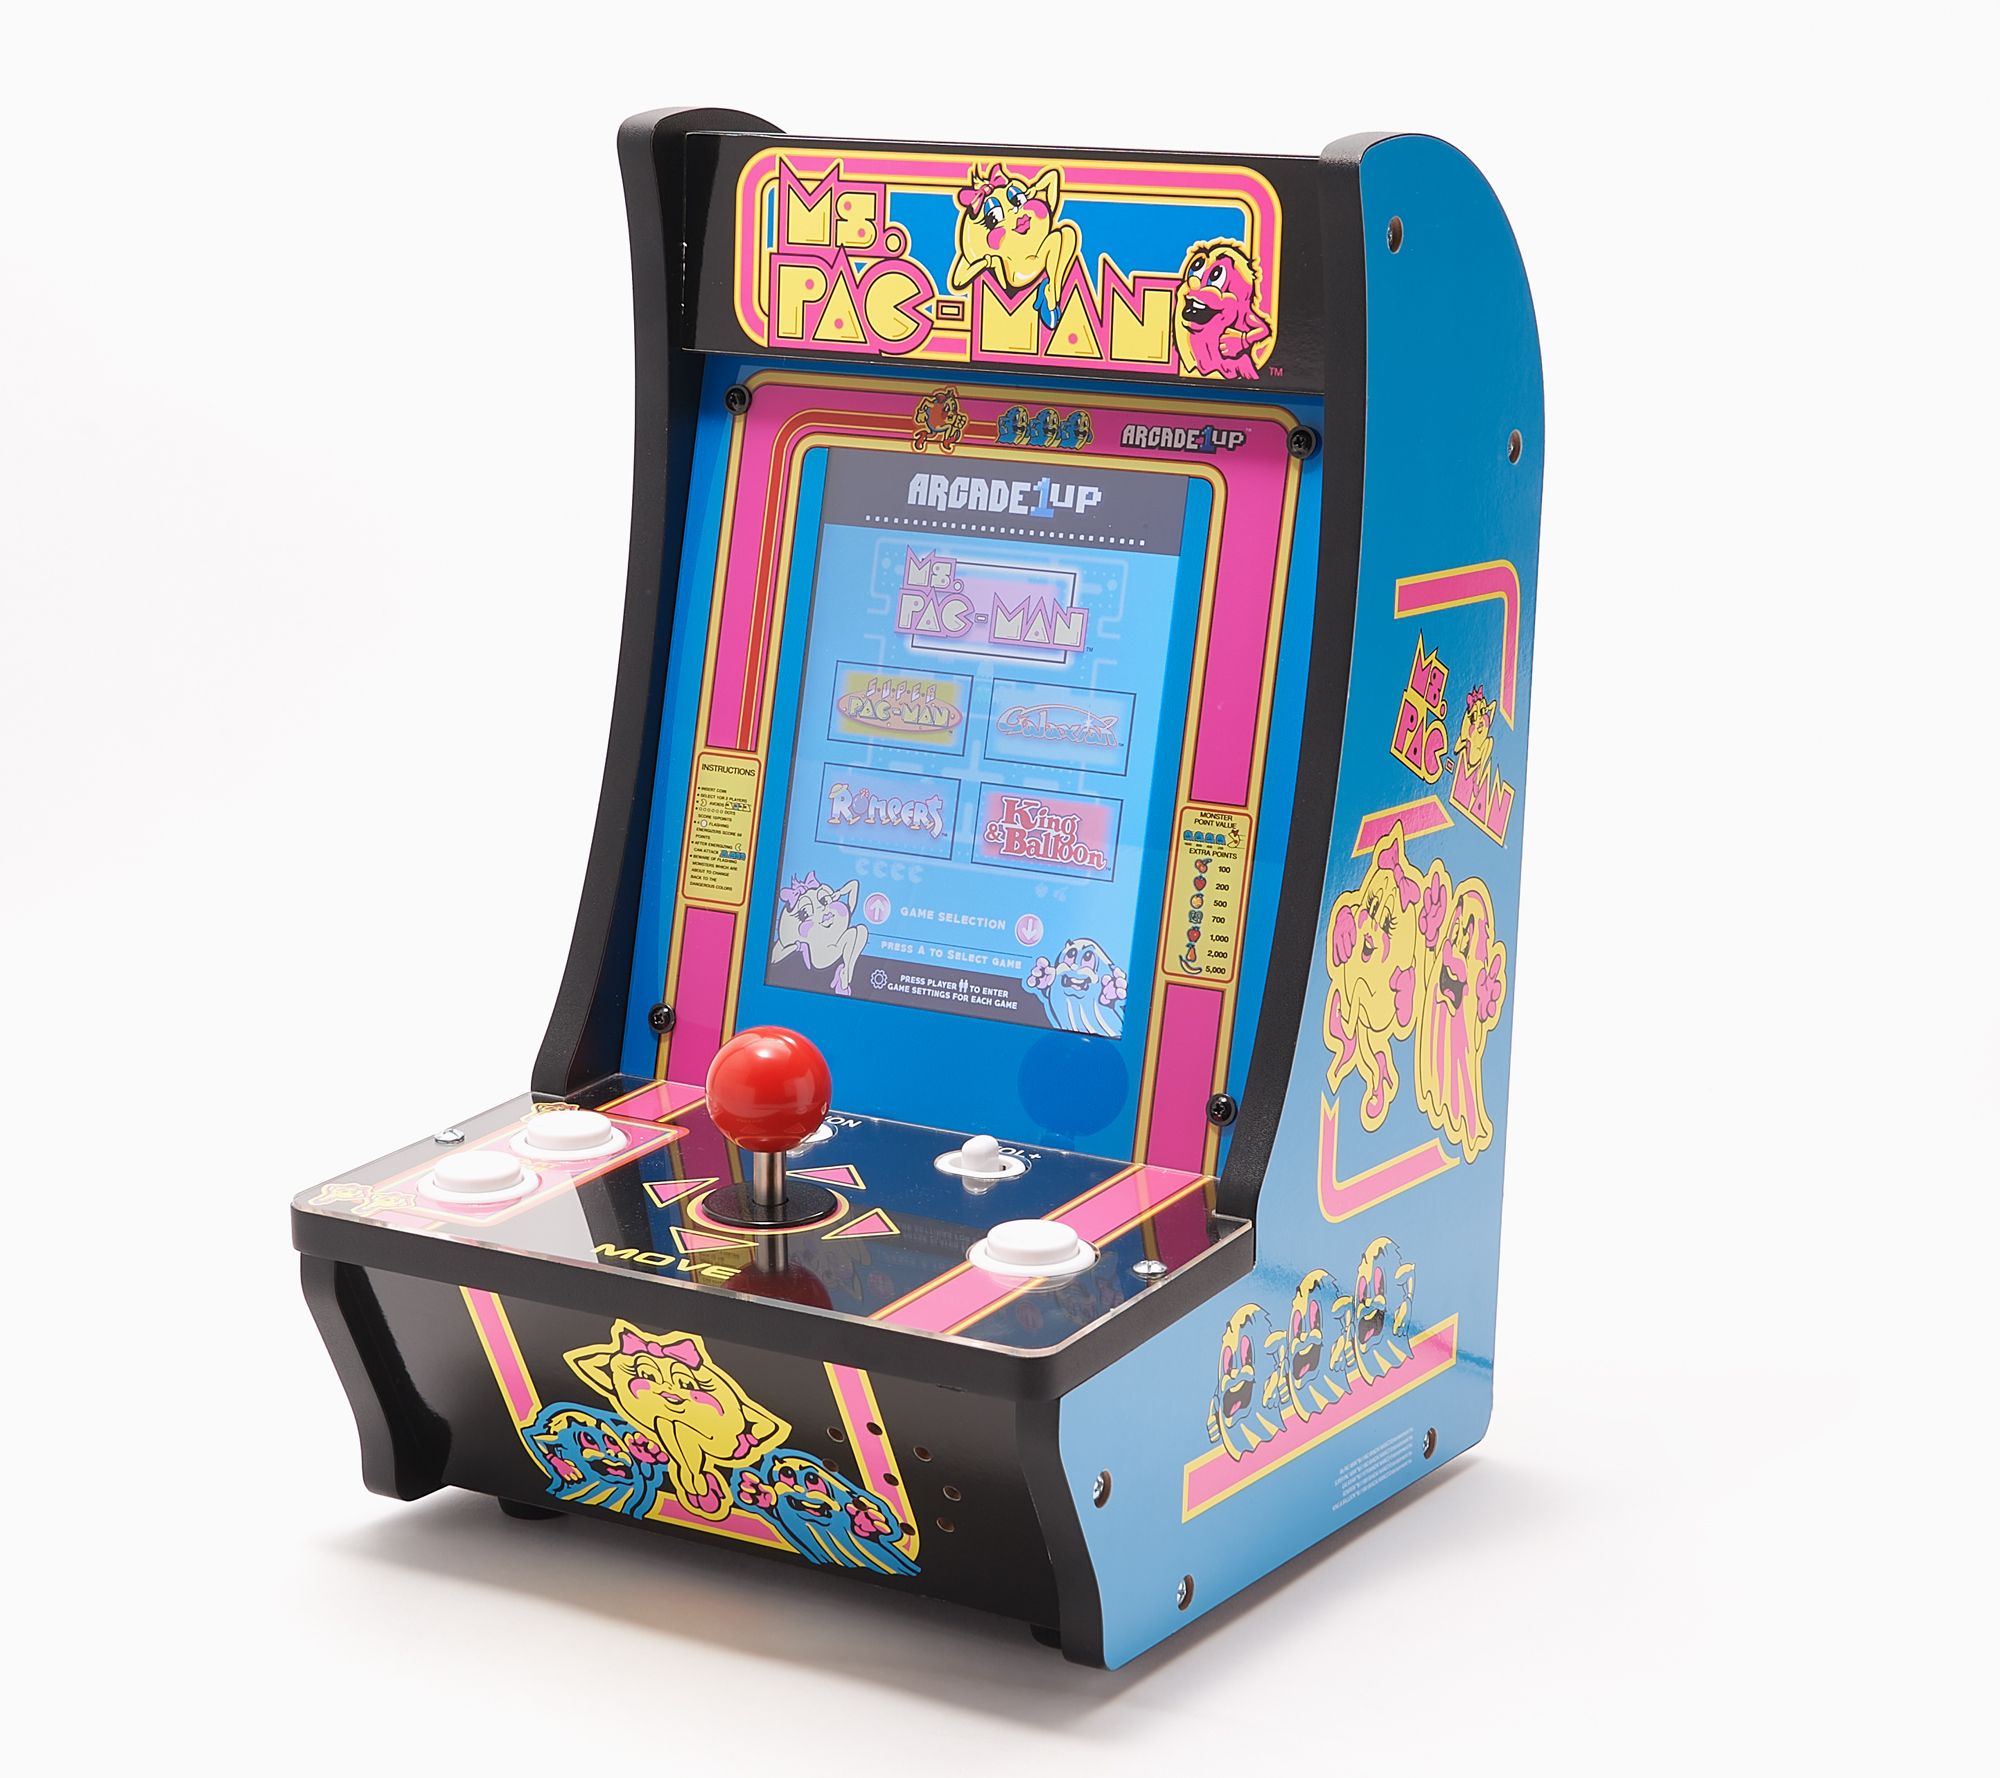 Arcade Classics Pac-man 40th Aniversary Retro Mini Game Gold Ships Next Day for sale online 